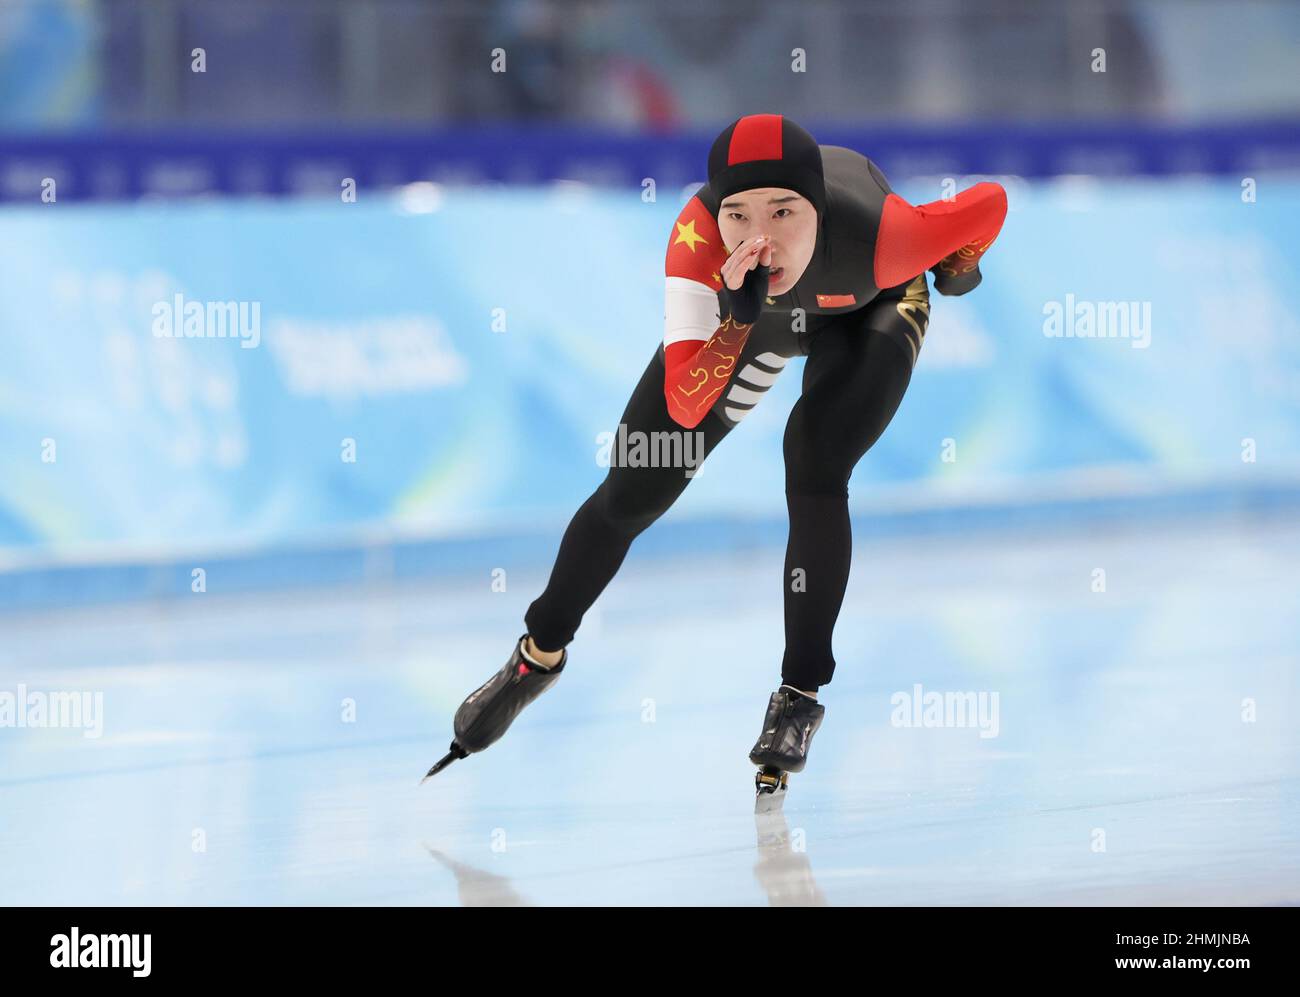 Beijing, China. 10th Feb, 2022. Han Mei of China competes during the speed skating women's 5,000m event at the National Speed Skating Oval in Beijing, capital of China, Feb. 10, 2022. Credit: Cheng Tingting/Xinhua/Alamy Live News Stock Photo